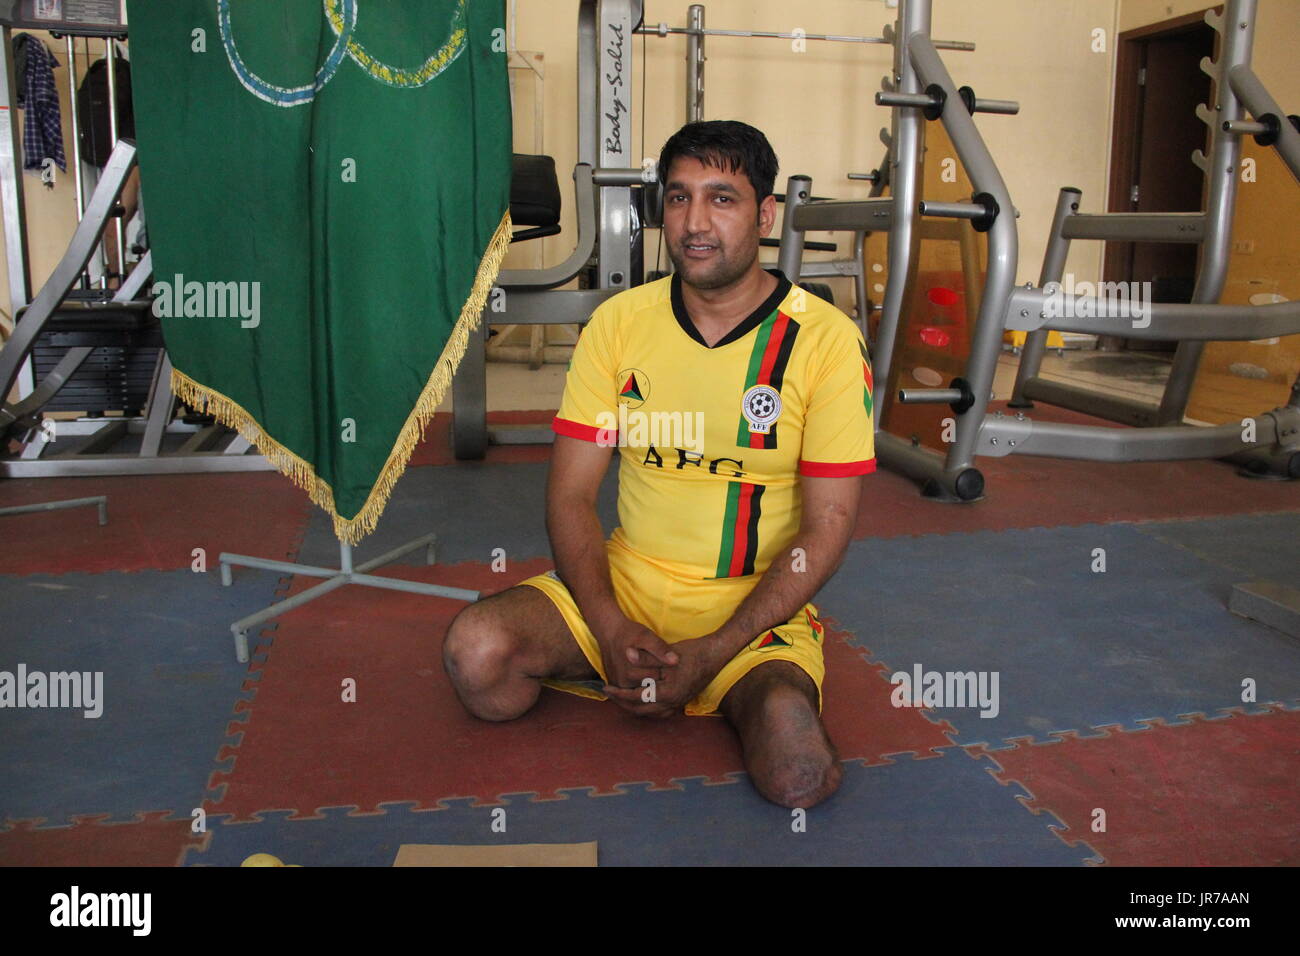 Former Afghan soldier Matiullah trains for the Invictus Games in Canada in a sports hall of the Afghan Army in Kabul, Afghanistan, 20 July 2017. The Invictus Games are a large sporting event for wounded soldiers from around the world. He is one of the eight men that were selected out of thousands of injured soldiers to represent Afghanistan in the event. Matiullah was injured in 2009 in Kandahar province in southern Afghanistan. He stepped on a mine laid by the Taliban during a patrol on foot. When a medic came to help him the Taliban detonated a second charge which tore apart his second leg. Stock Photo